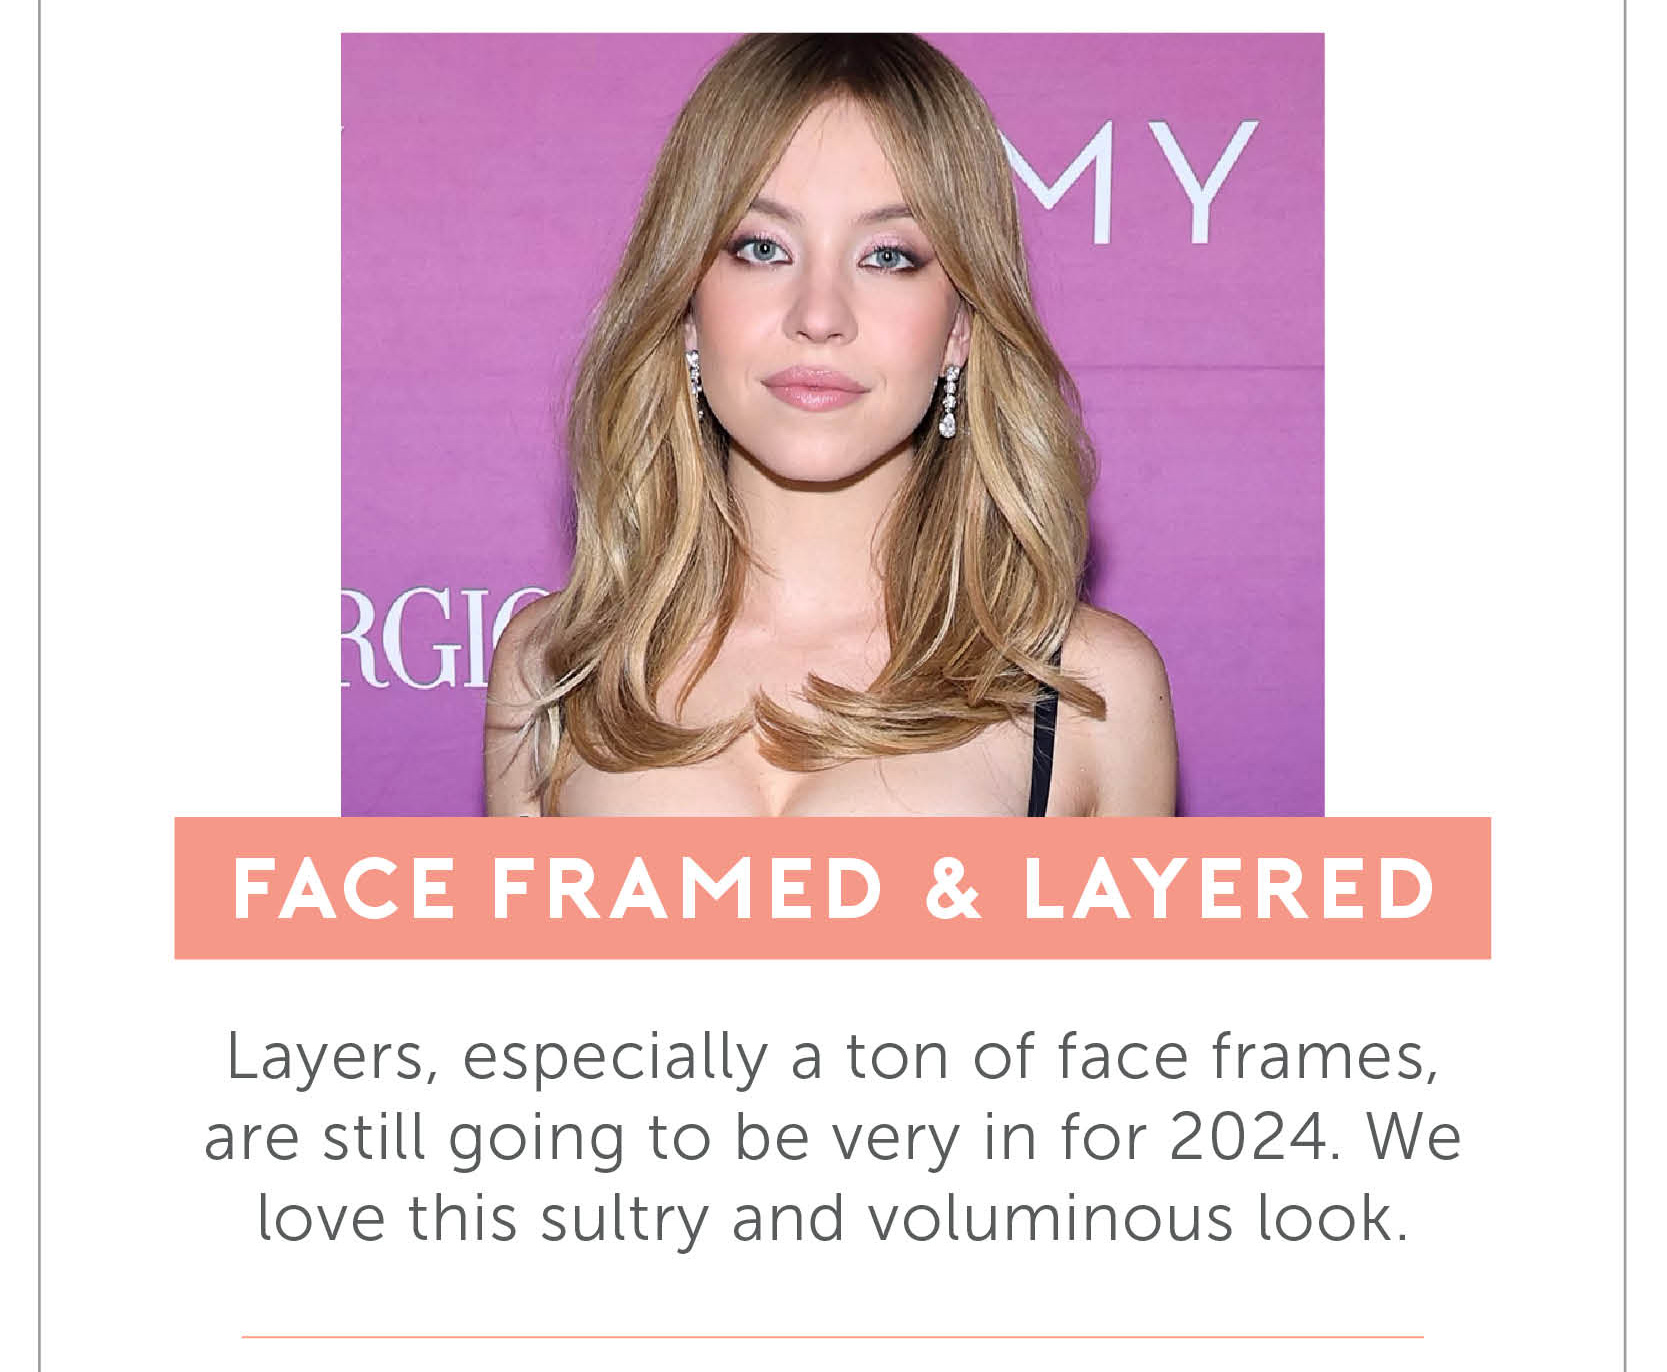 Face Framed and layered- Layers, especially a ton of face frames, are still going to be very in for 2024. We love this sultry and voluminous look.